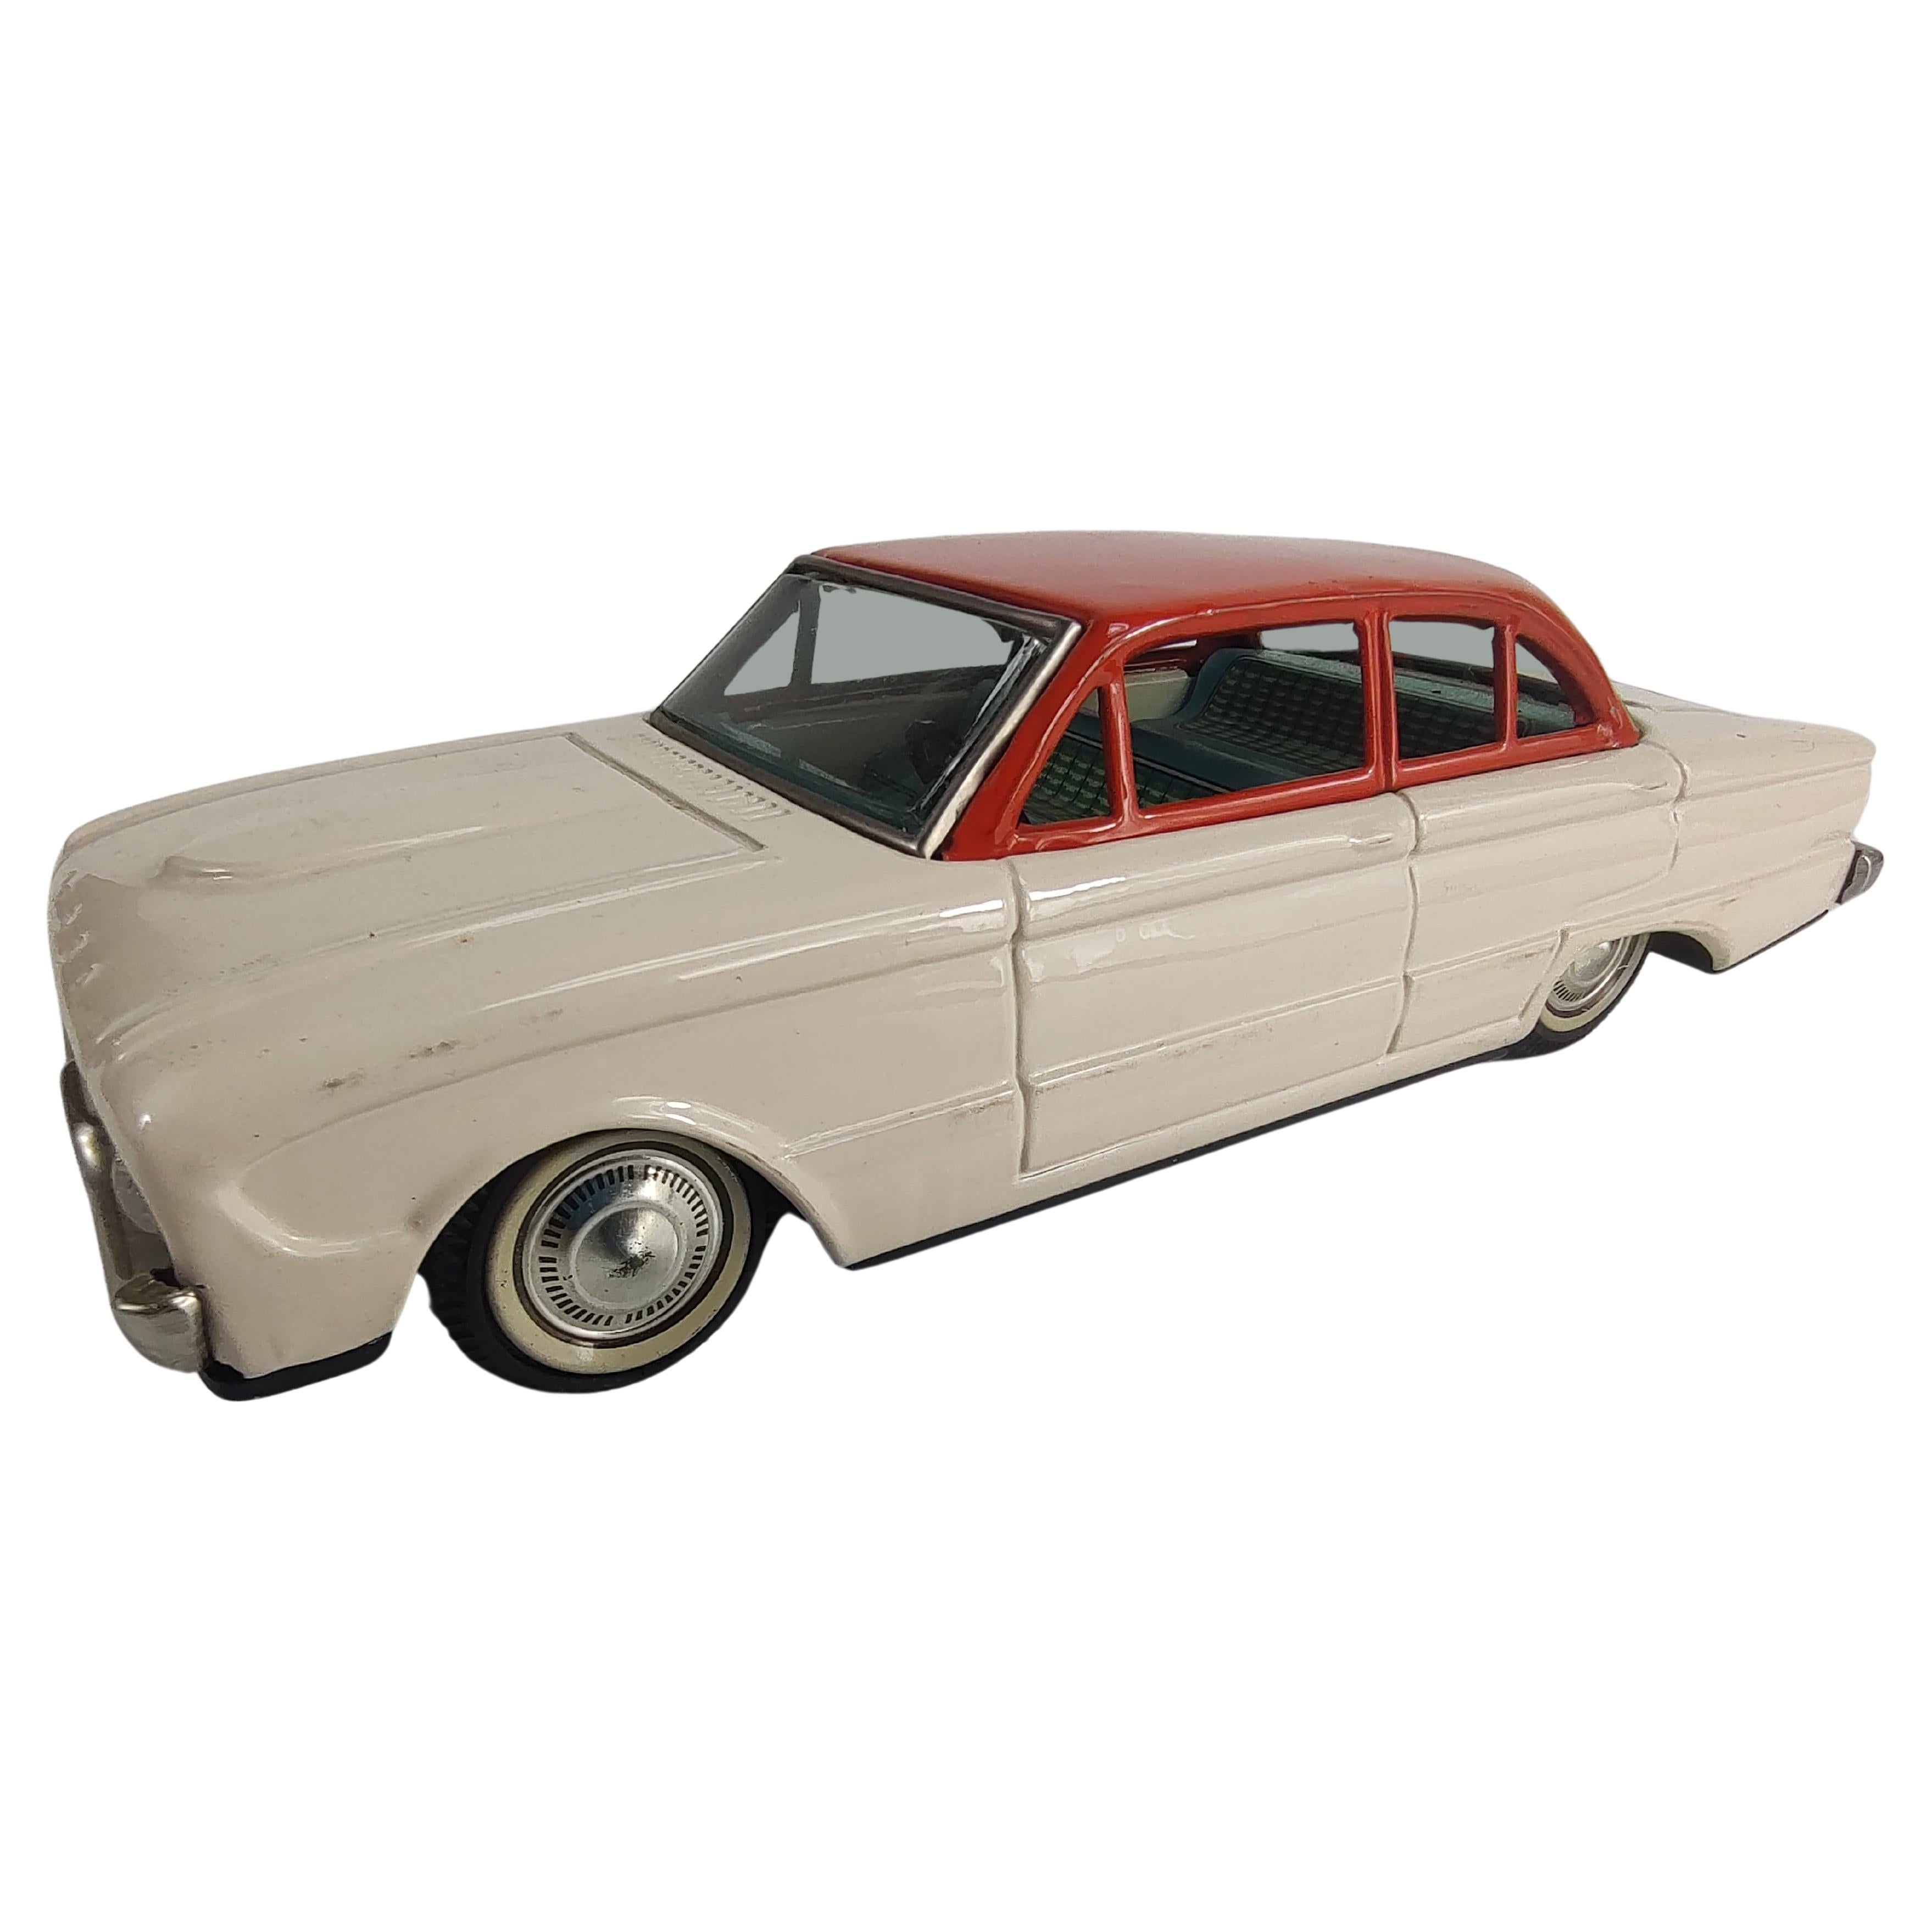 Mid Century Japanese Tin Litho Toy Car Ford Falcon Friction C1960 For Sale 1